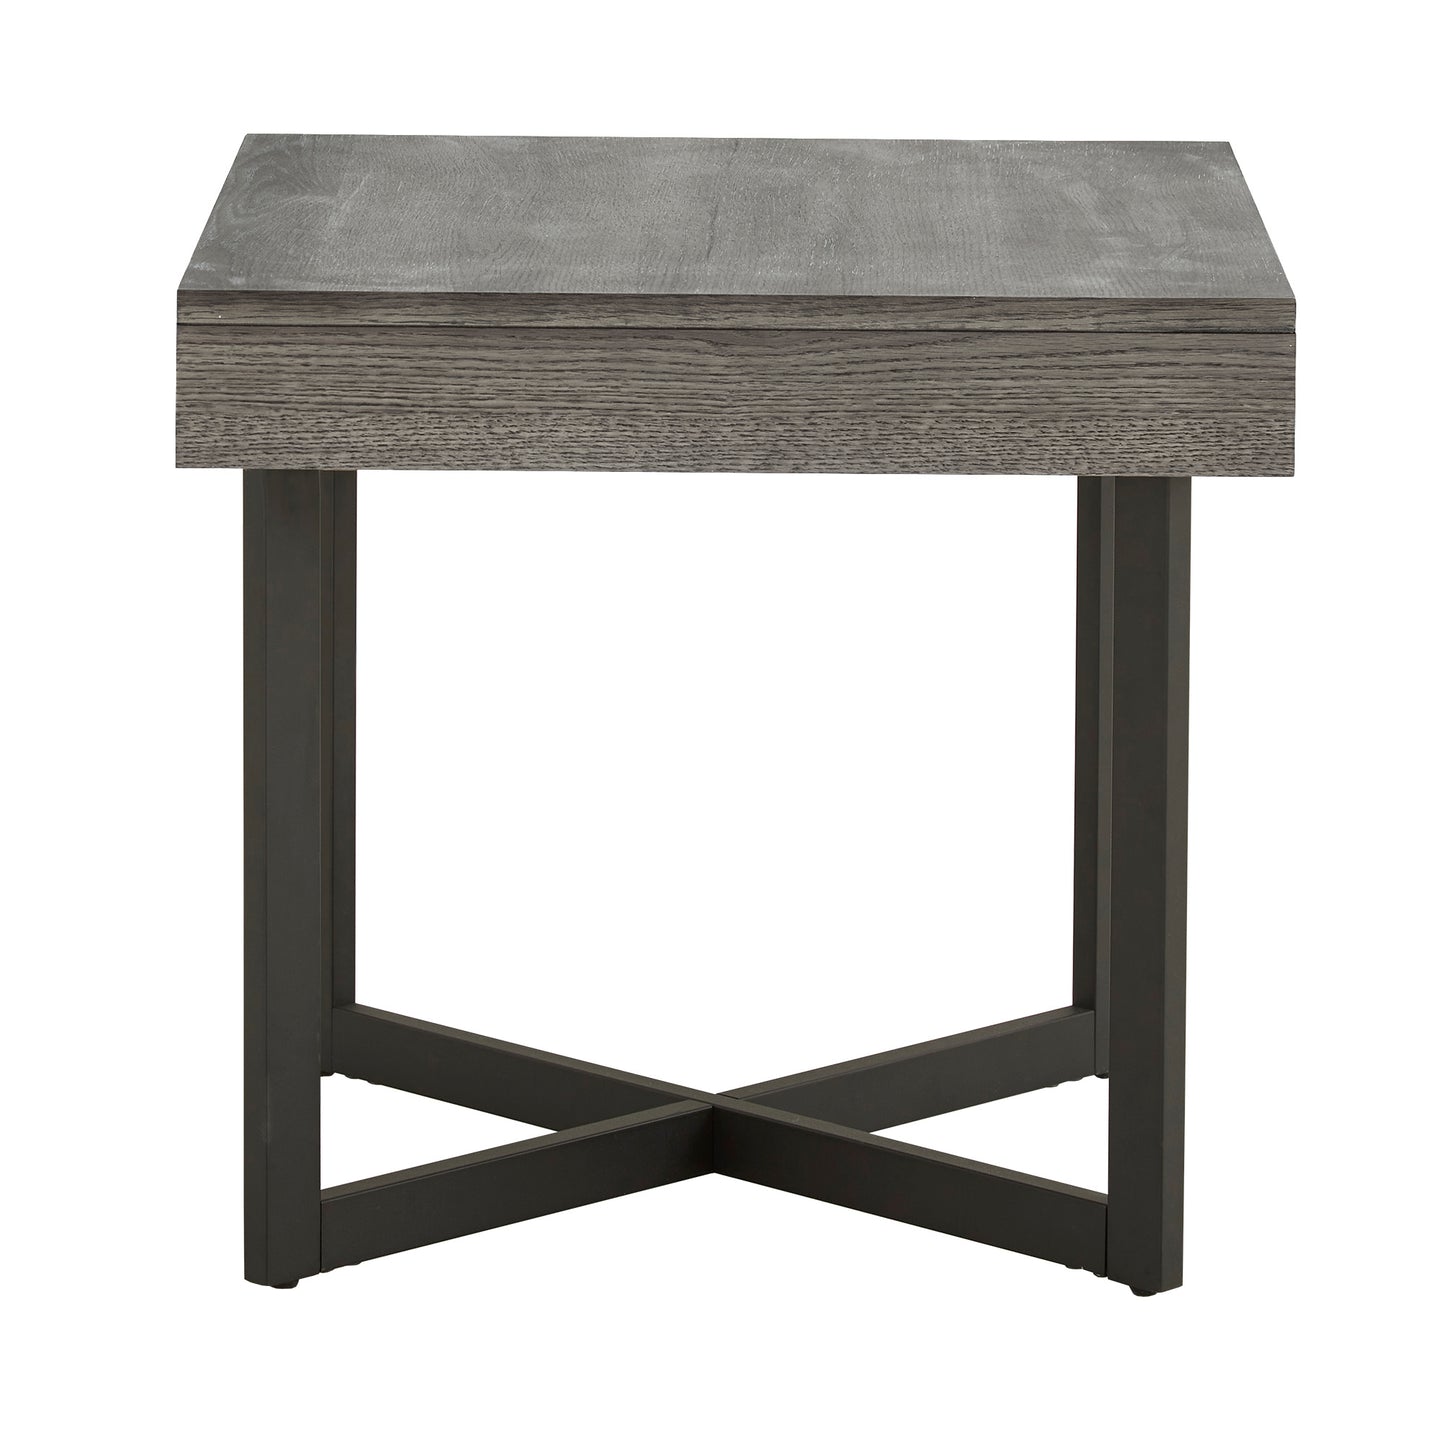 Wood Finish End Table with One Drawer - Grey Finish